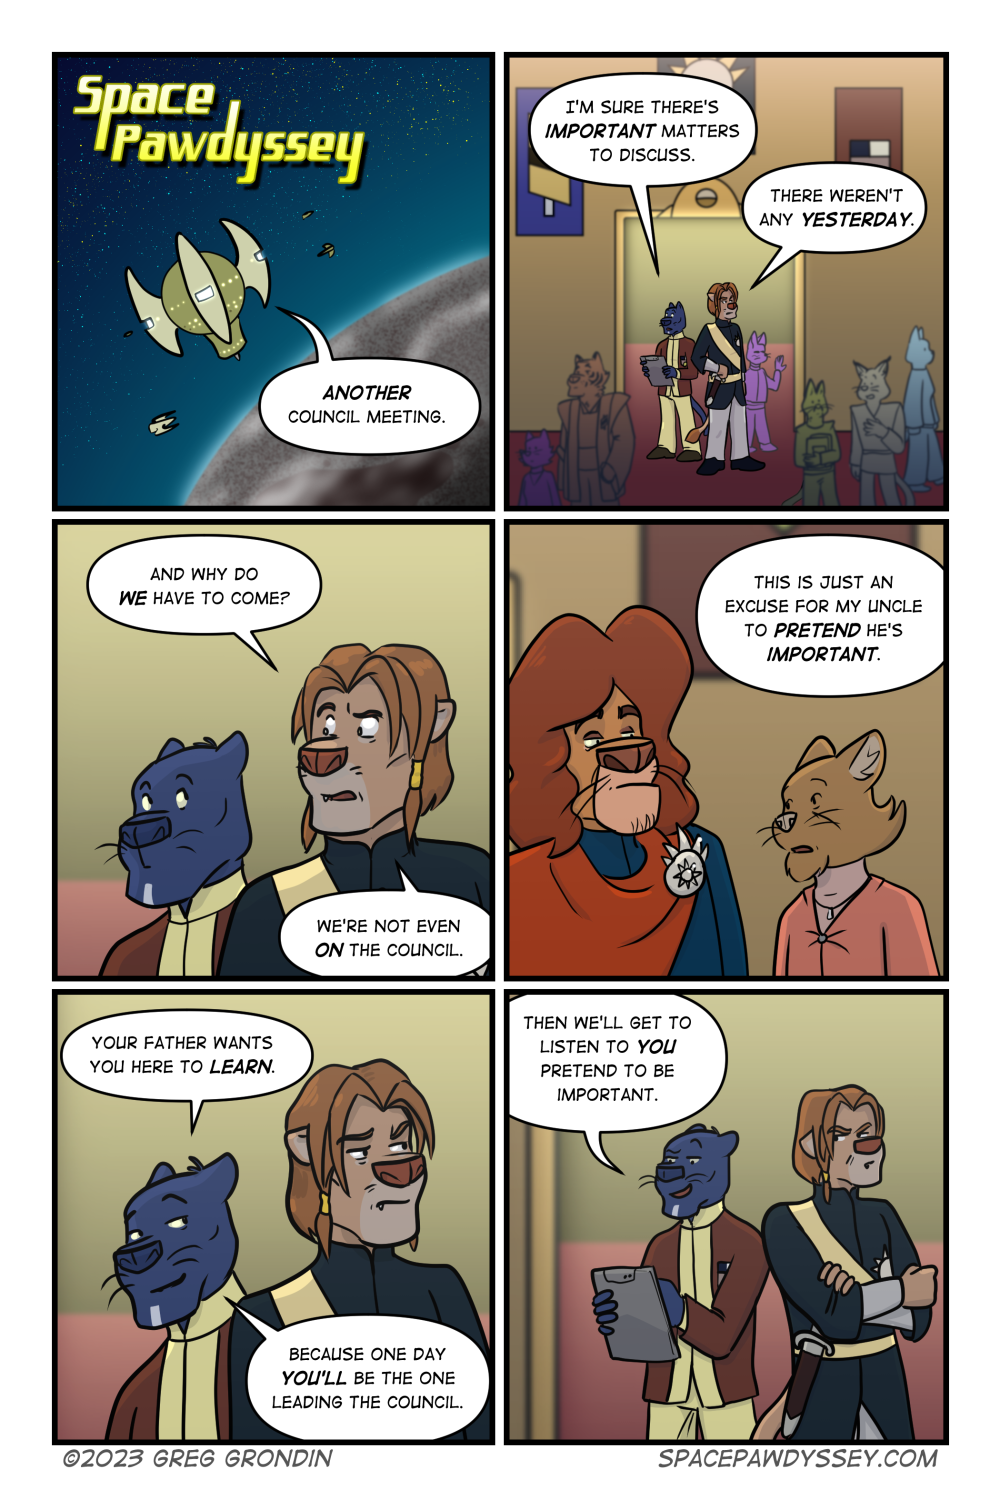 Space Pawdyssey #639